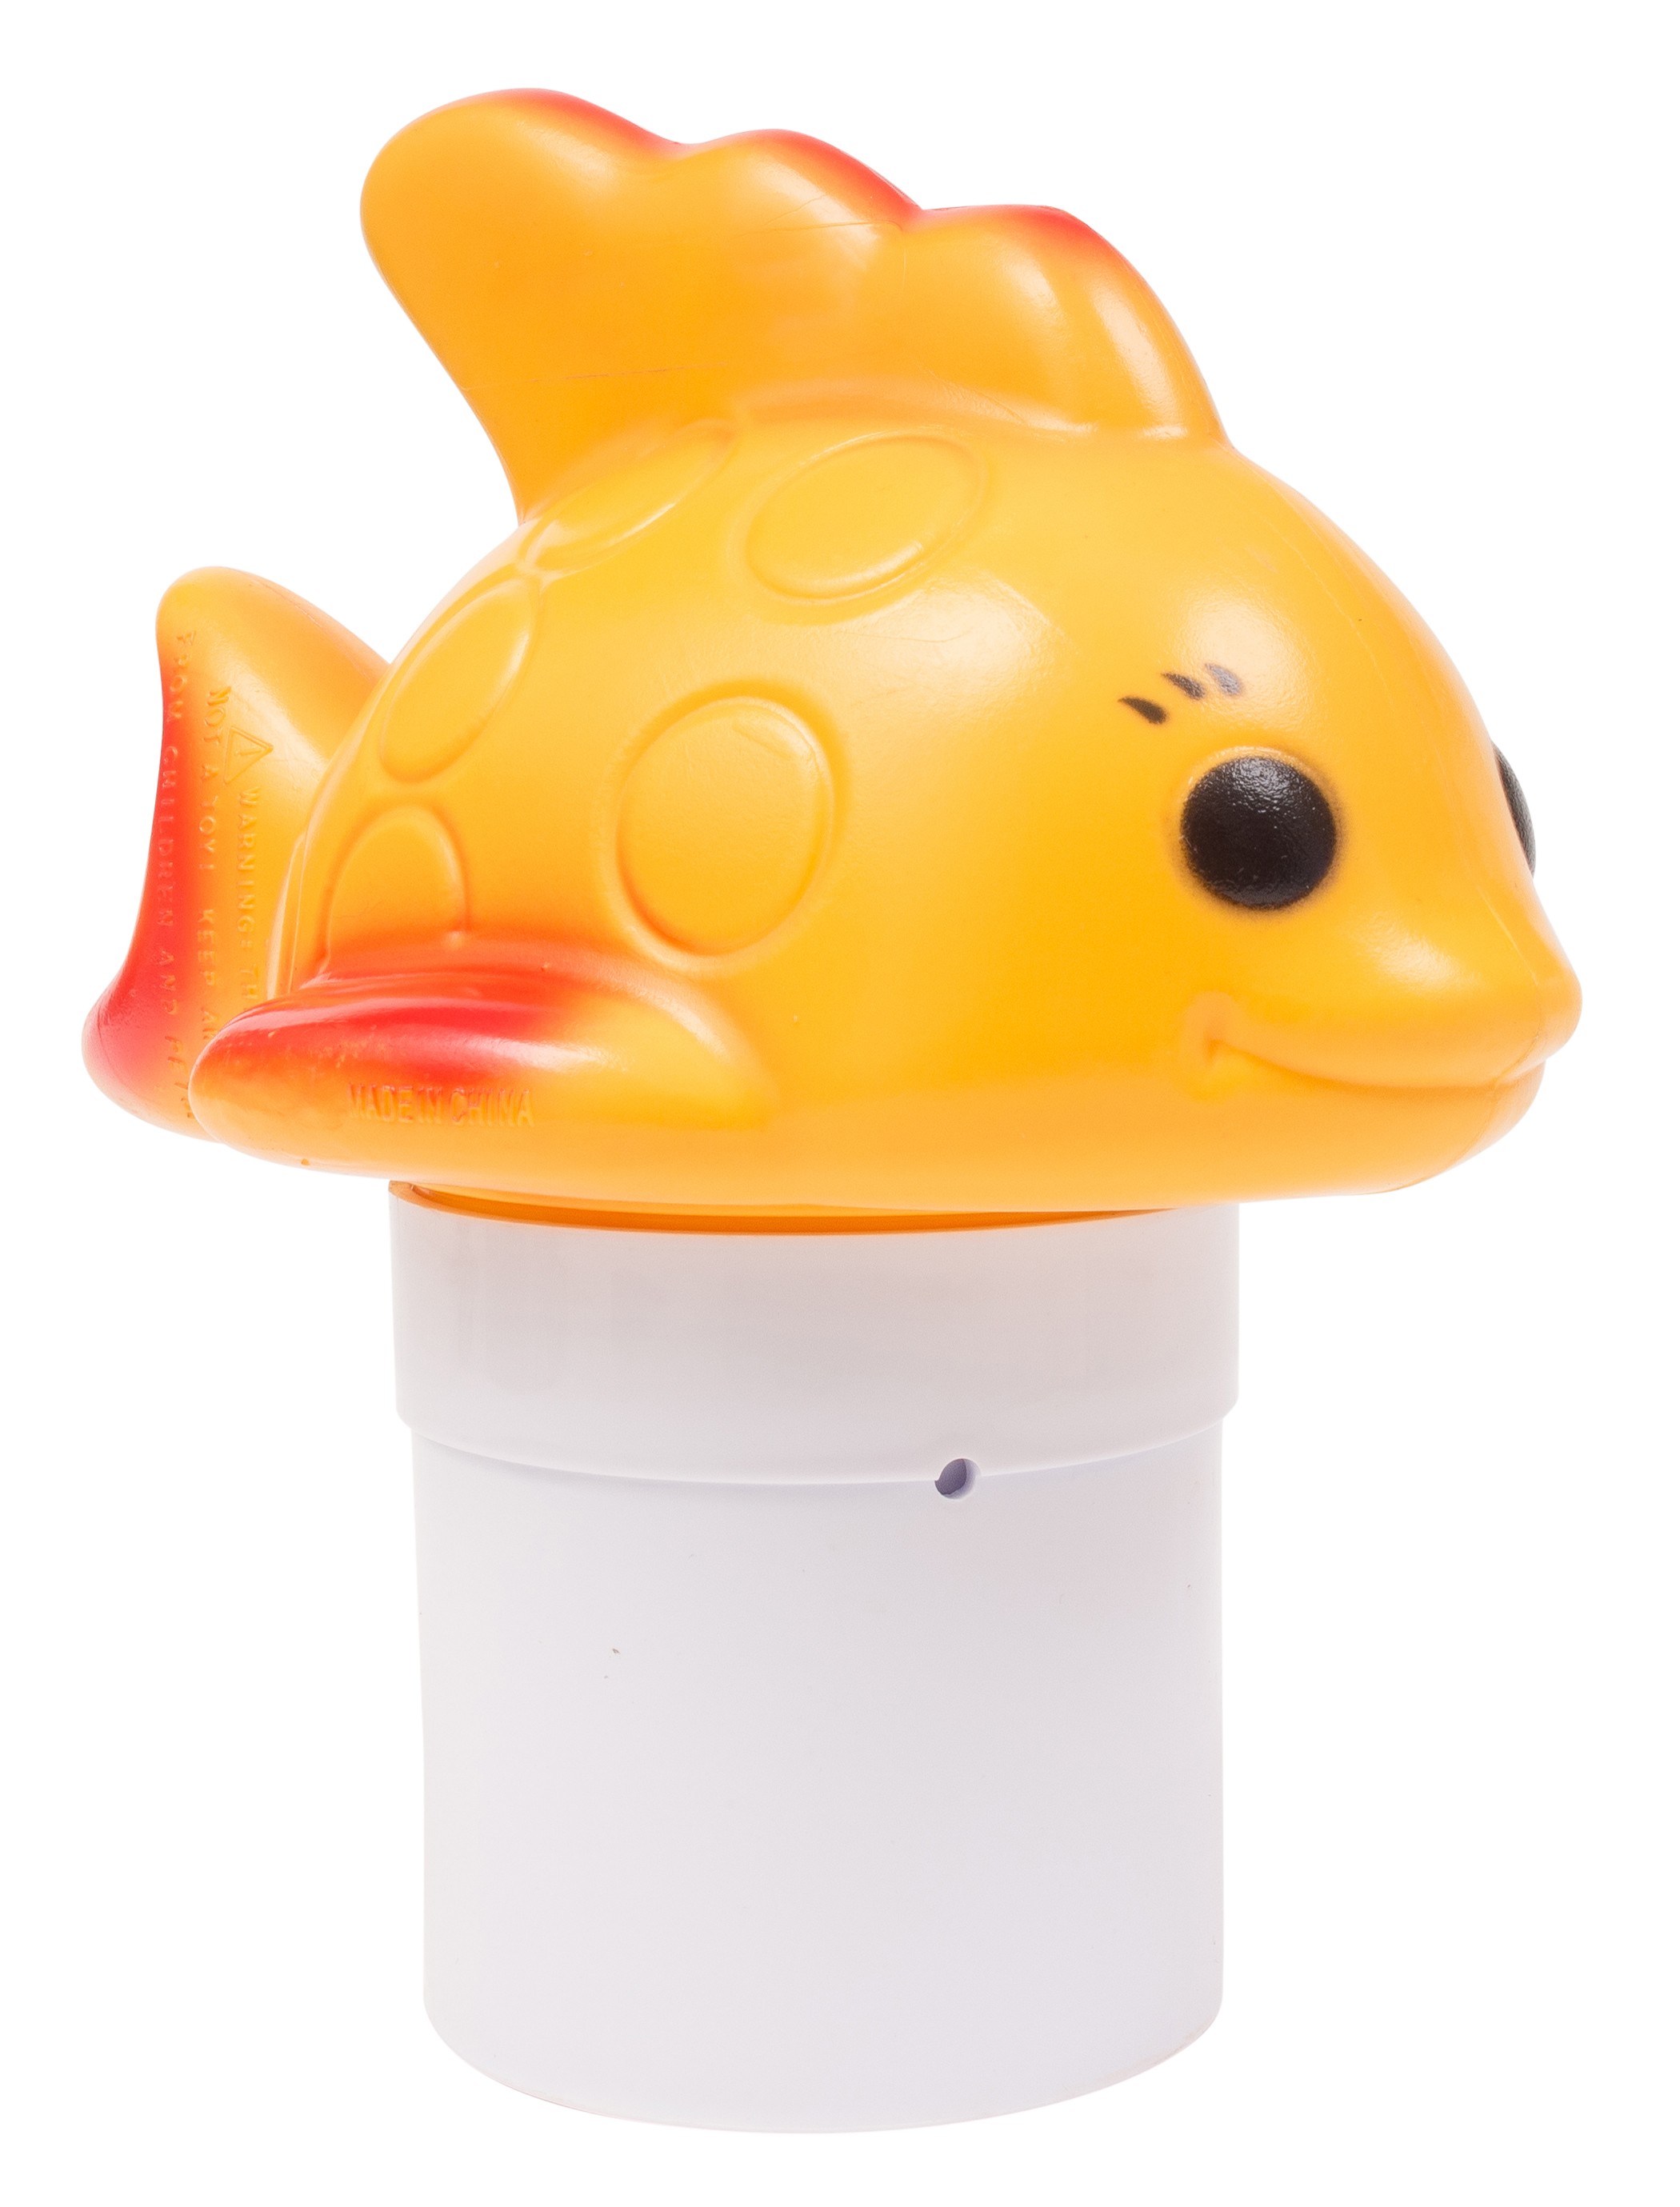 Floating Chlorine Bromine Dispenser for Swimming Pools Shaped as a Gold Fish